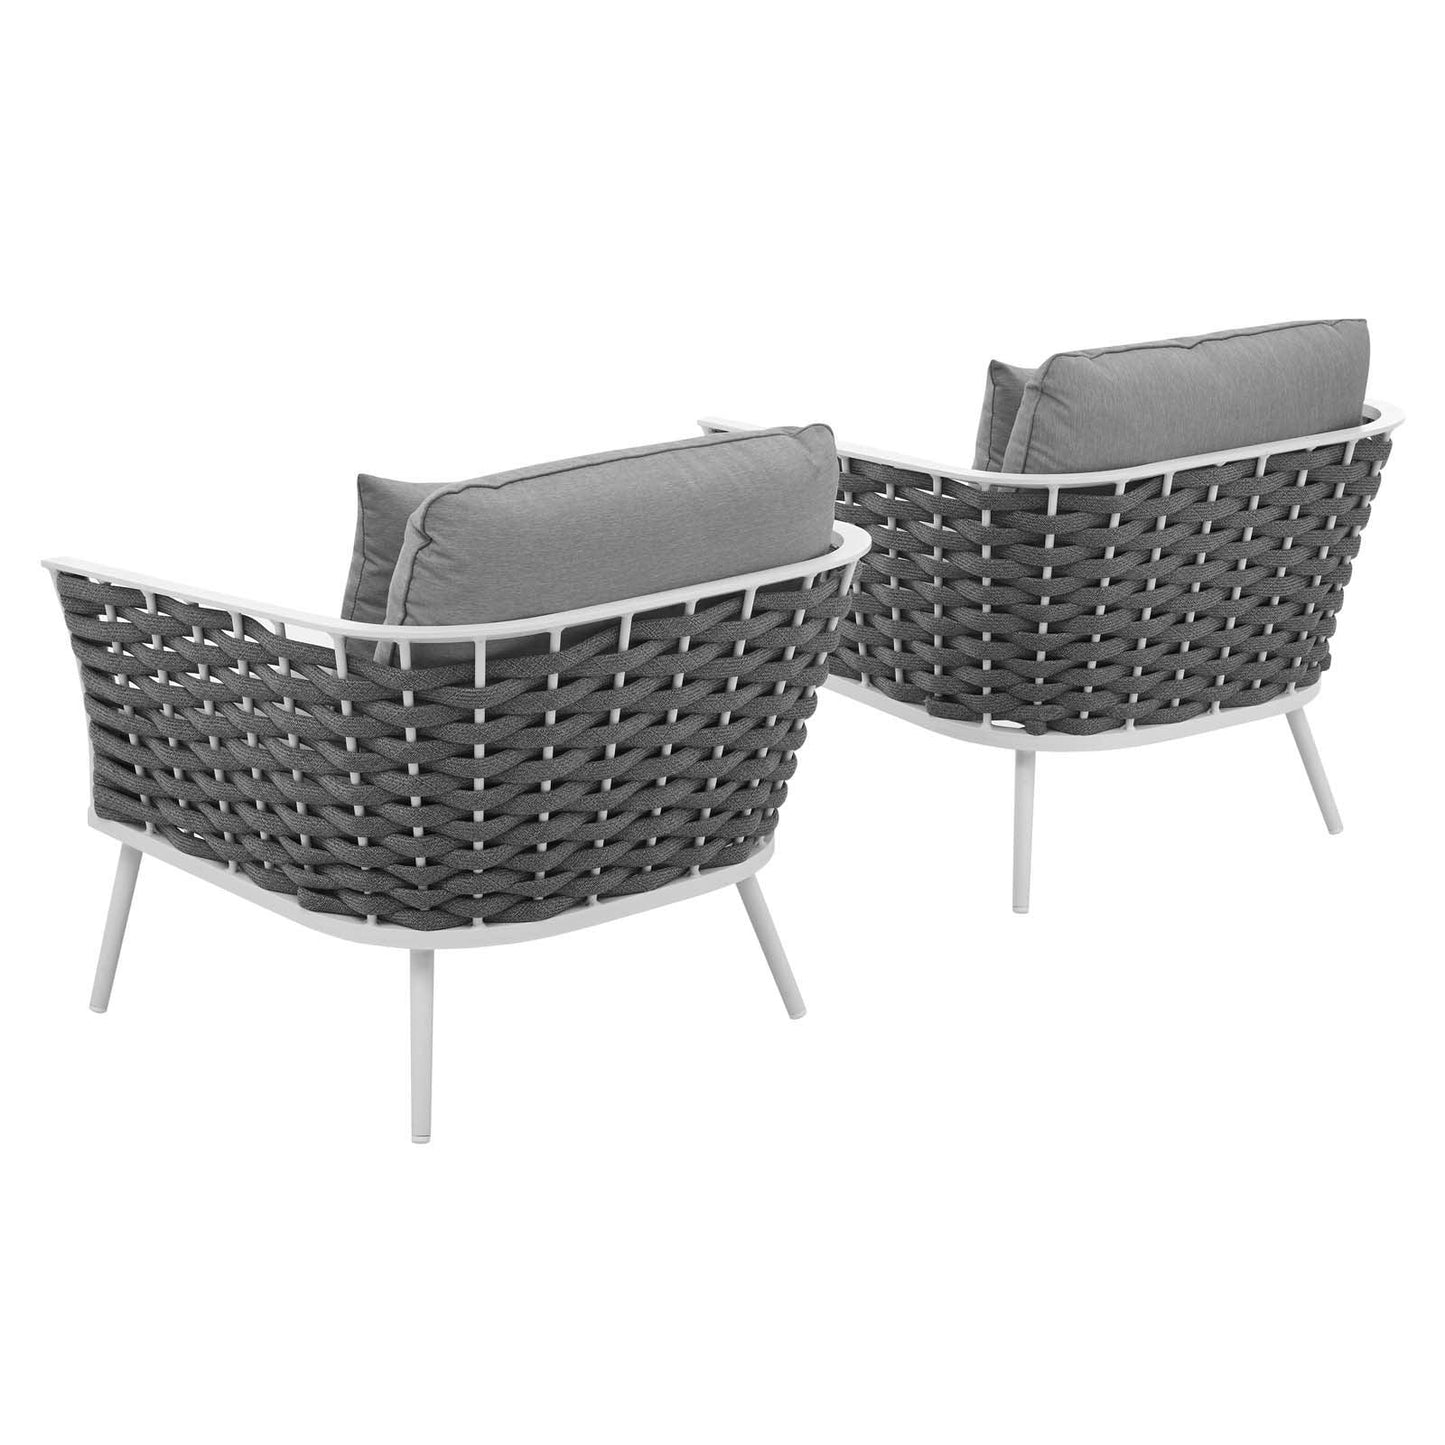 Modway Stance Armchair Outdoor Patio Aluminum Set of 2 FredCo